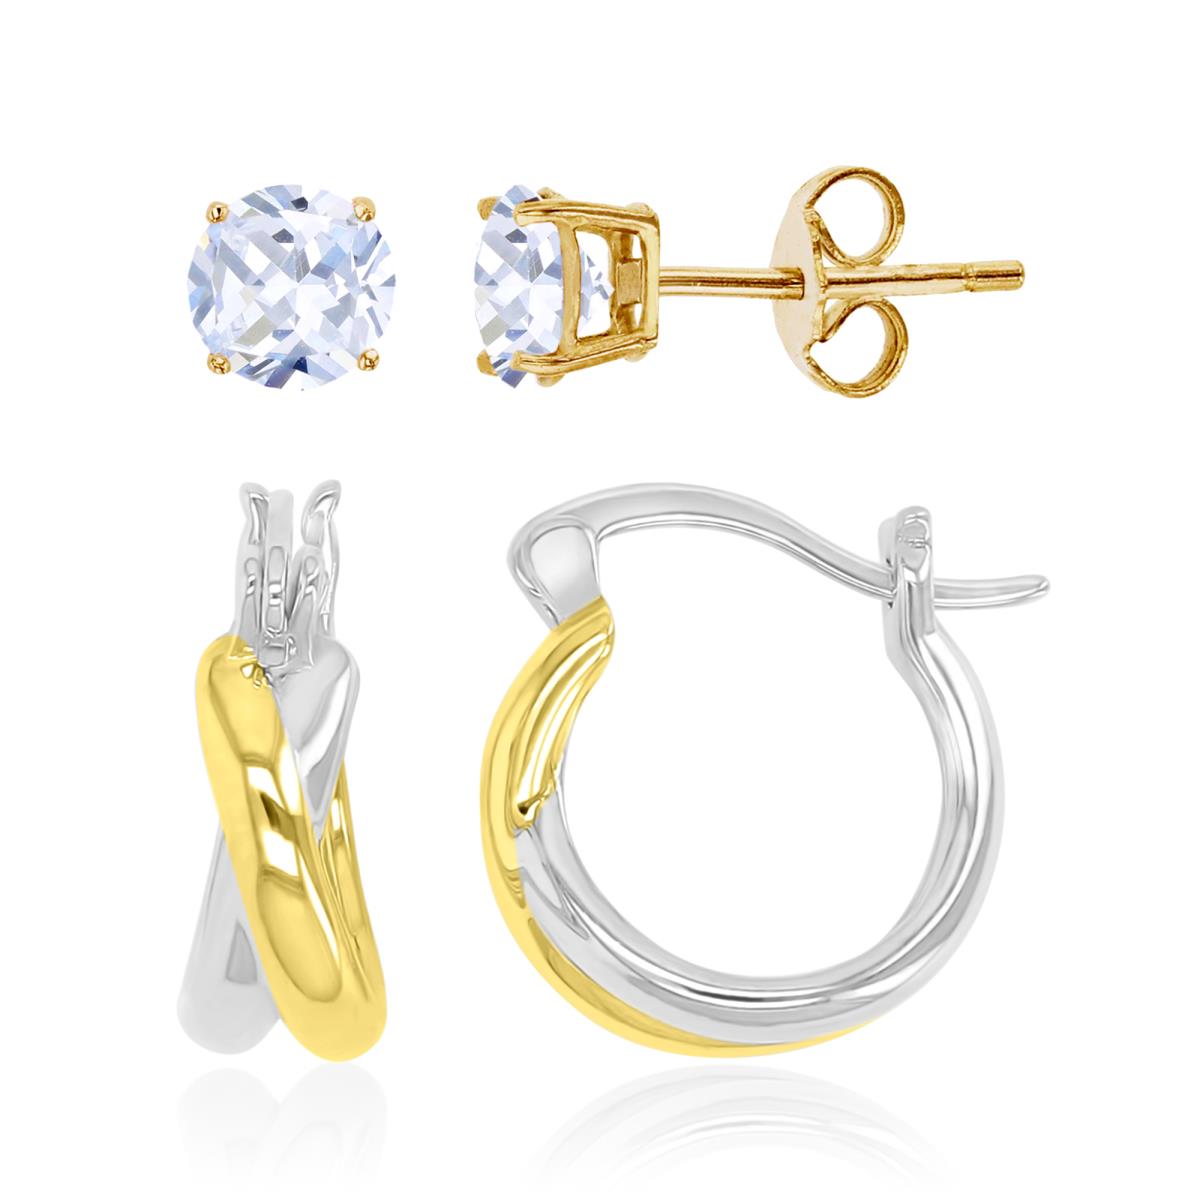 Sterling Silver Yellow & White 4.0mm Round White CZ Solitaire & 5x14mm Crossover Huggie Earrings Set